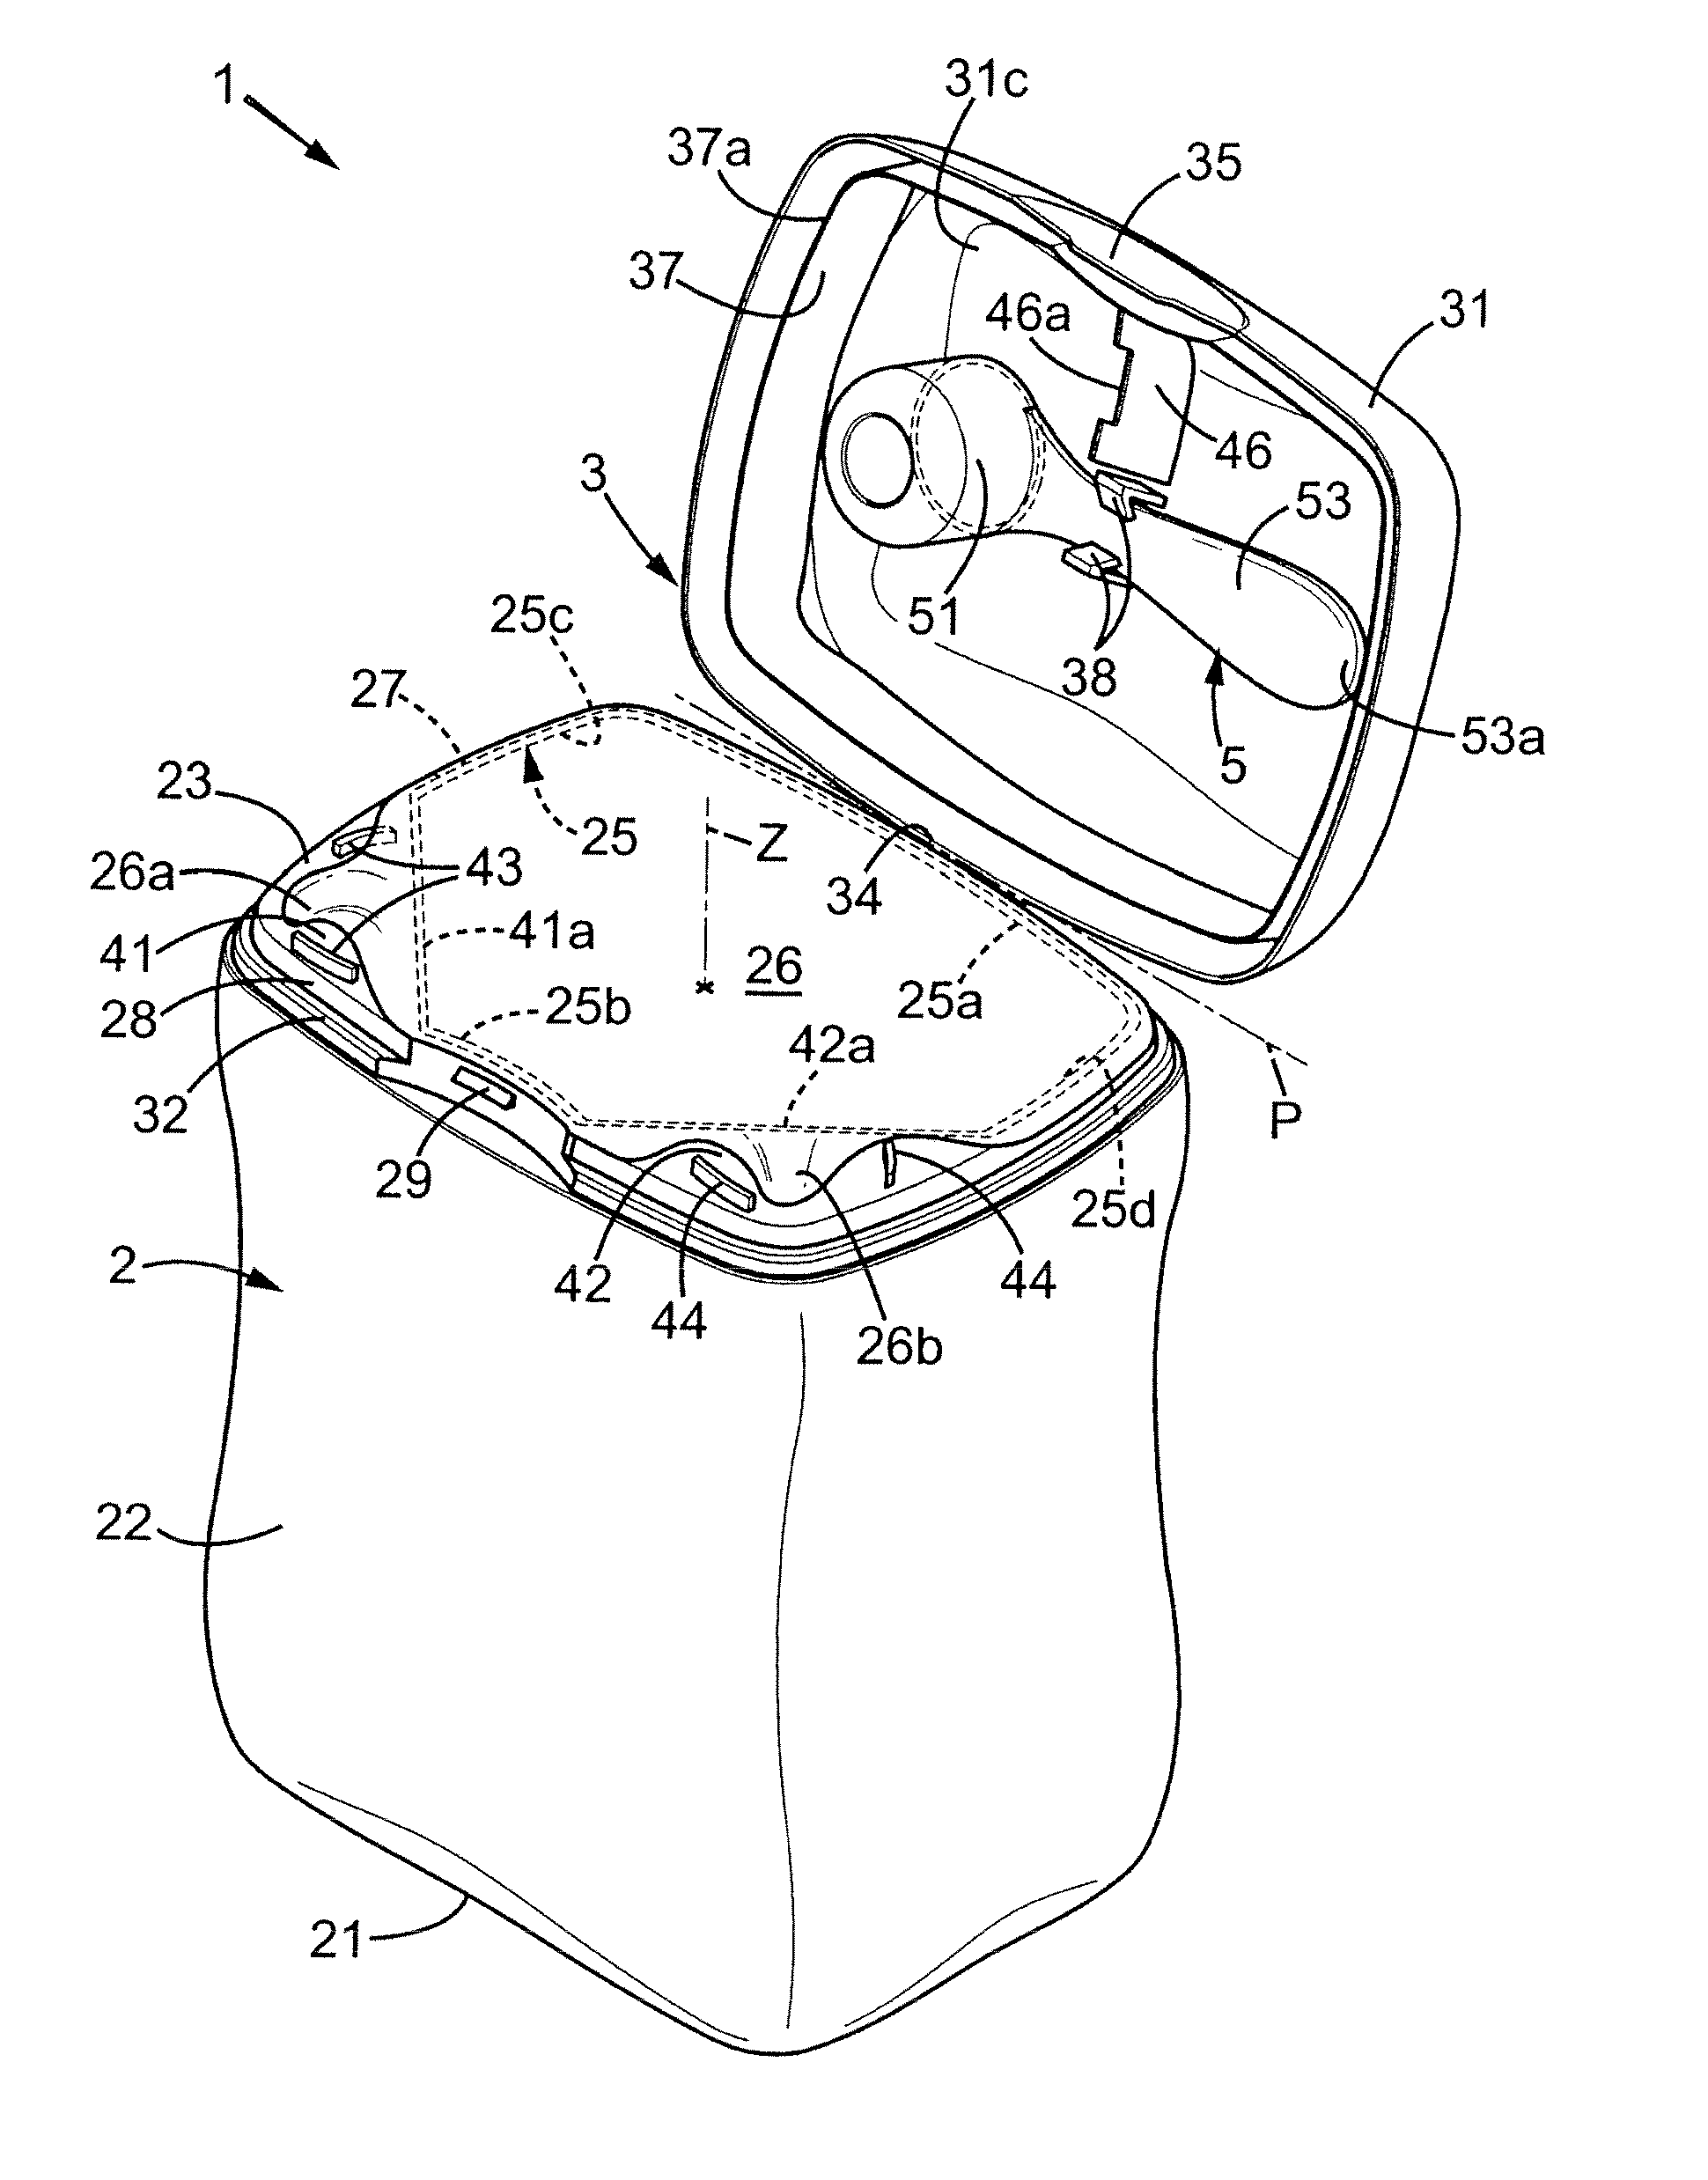 Package for food product taken out with a measuring device